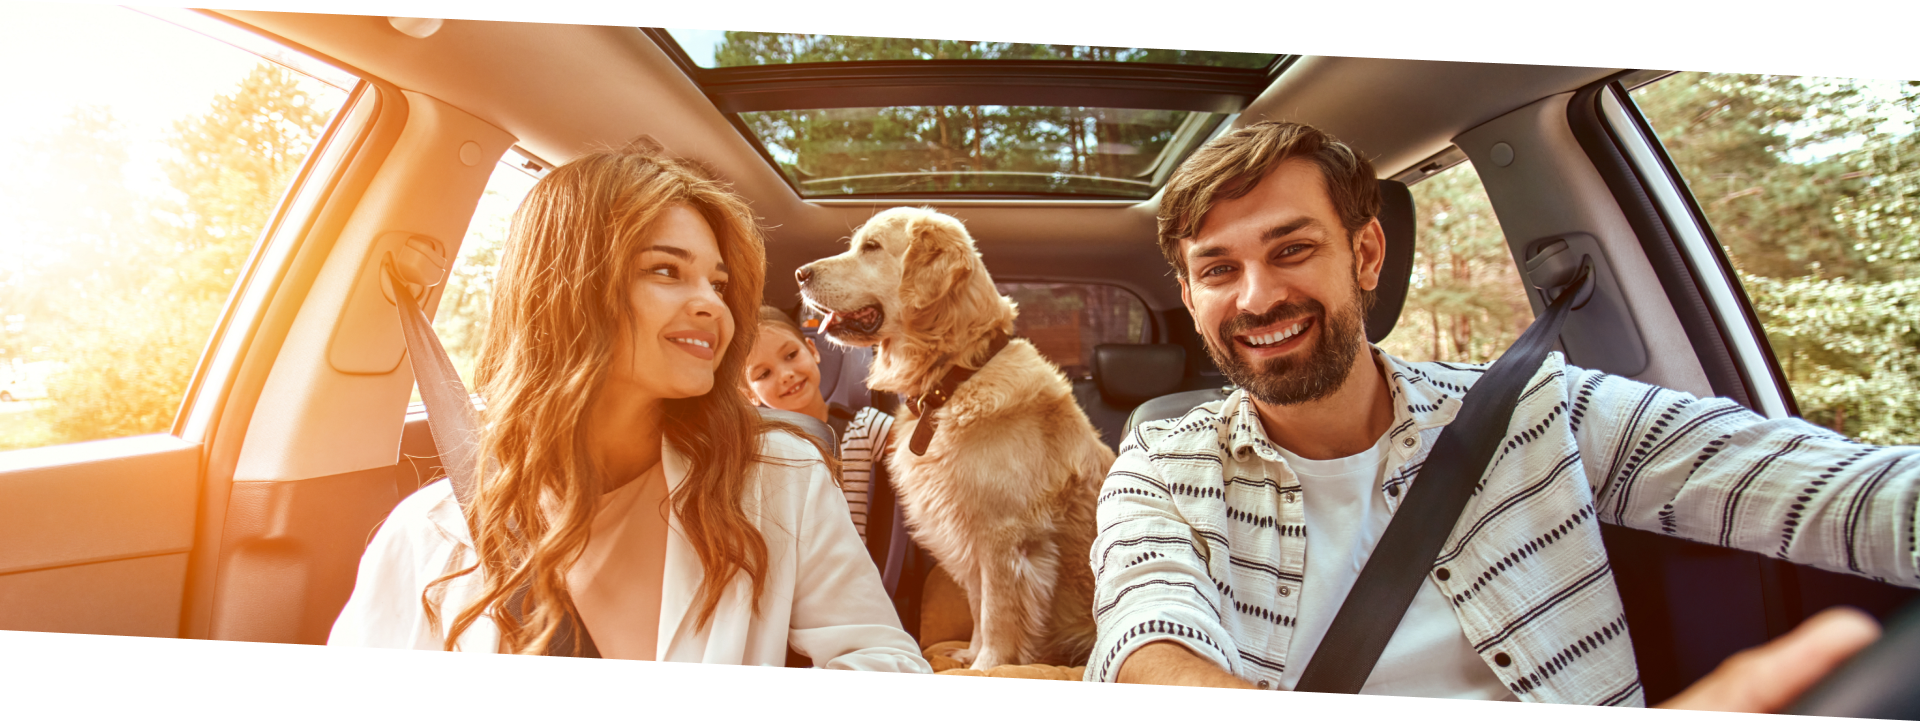 Ensure Financial Security For Your Family with Auto EZ123 Auto Insurance Coverage in Illinois